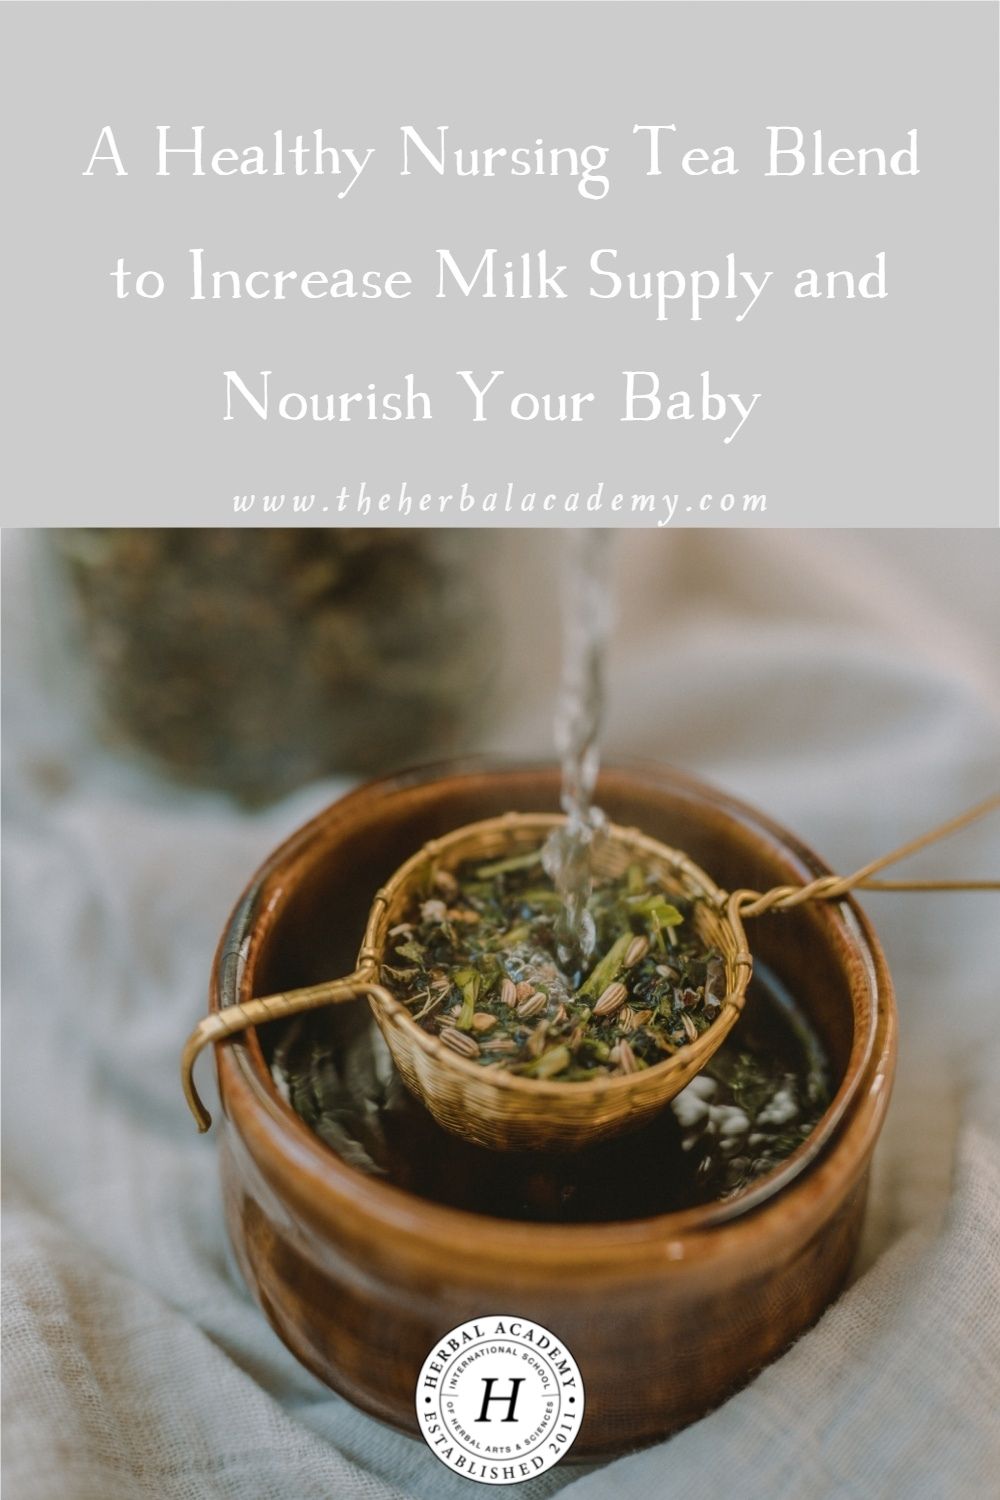 A Healthy Nursing Tea Blend to Increase Milk Supply and Nourish Your Baby | Herbal Academy | For successful nursing, gentle supports like this healthy nursing tea can assist you to sustain a rich and optimized milk supply.